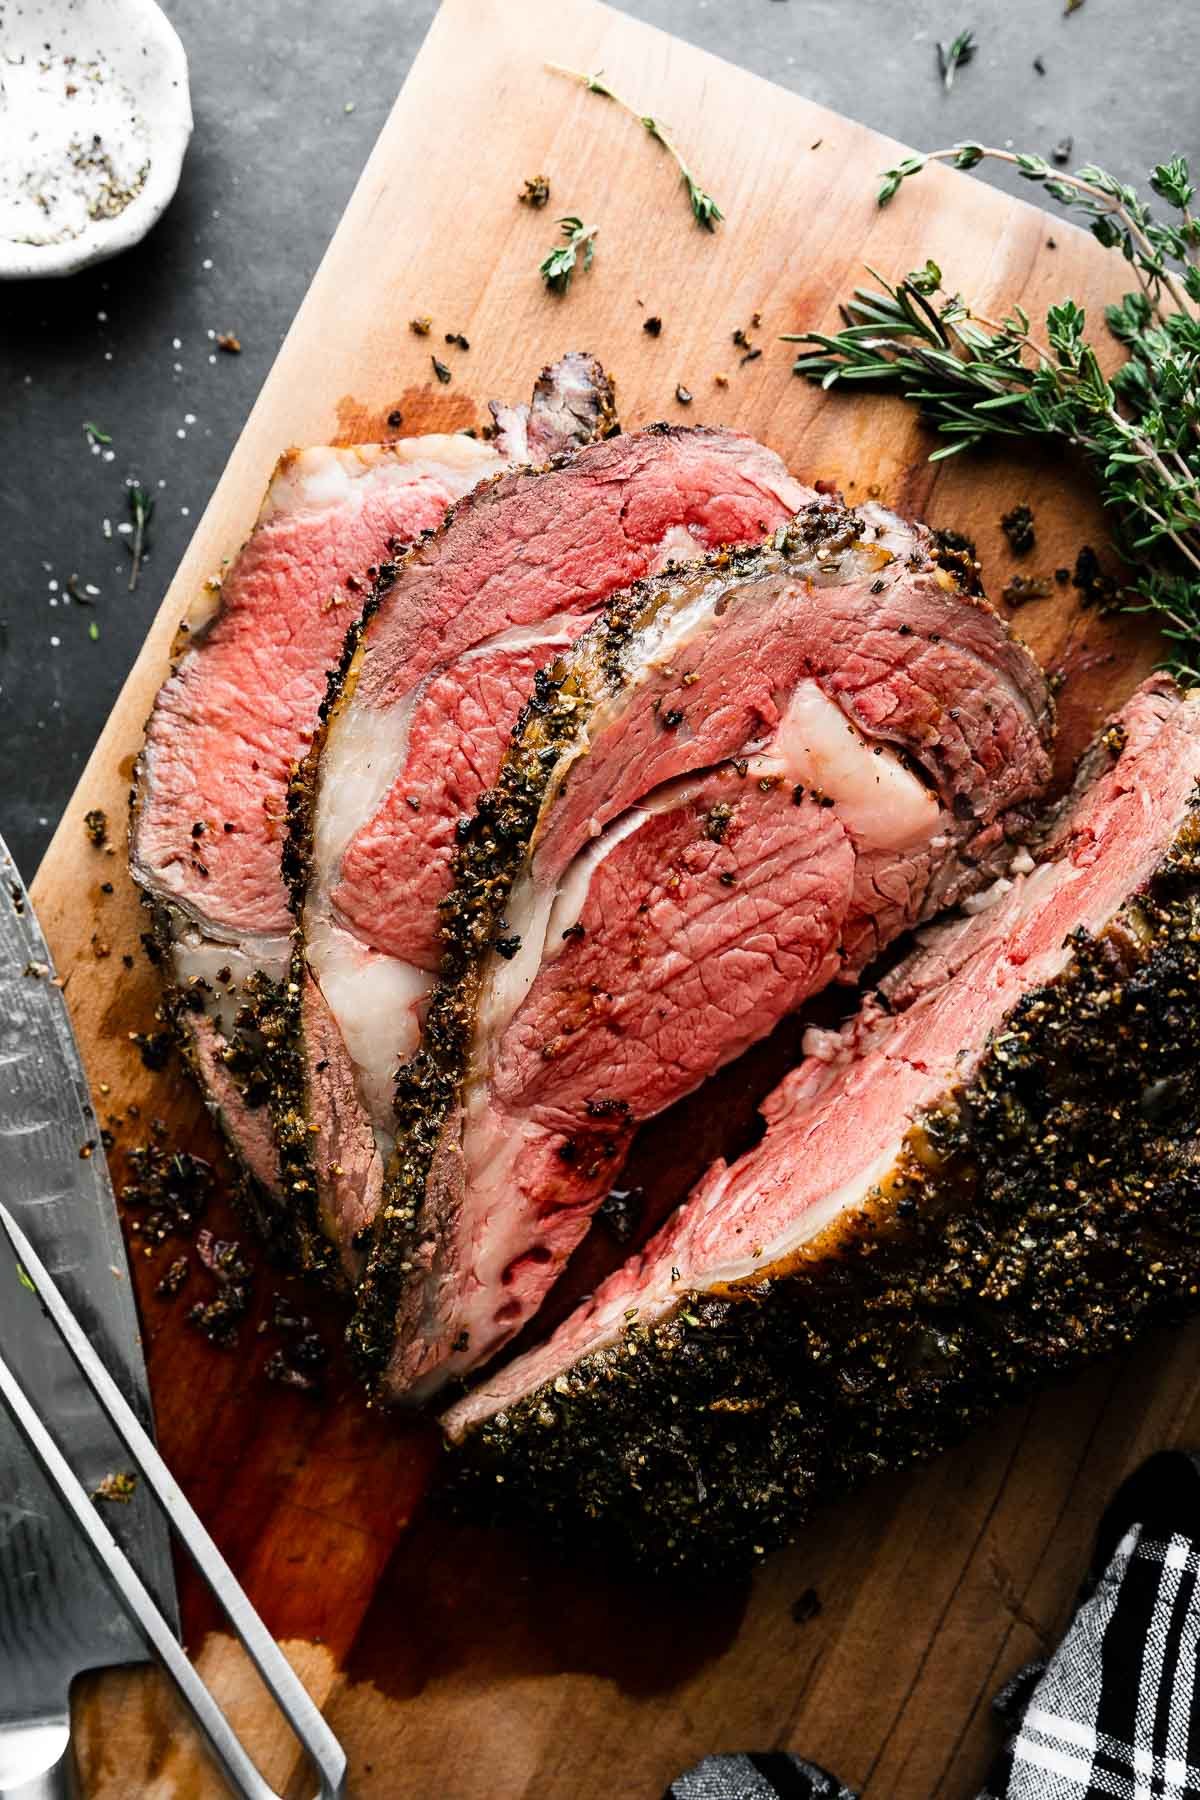 https://playswellwithbutter.com/wp-content/uploads/2021/12/Garlic-Herb-Crusted-Prime-Rib-16.jpg